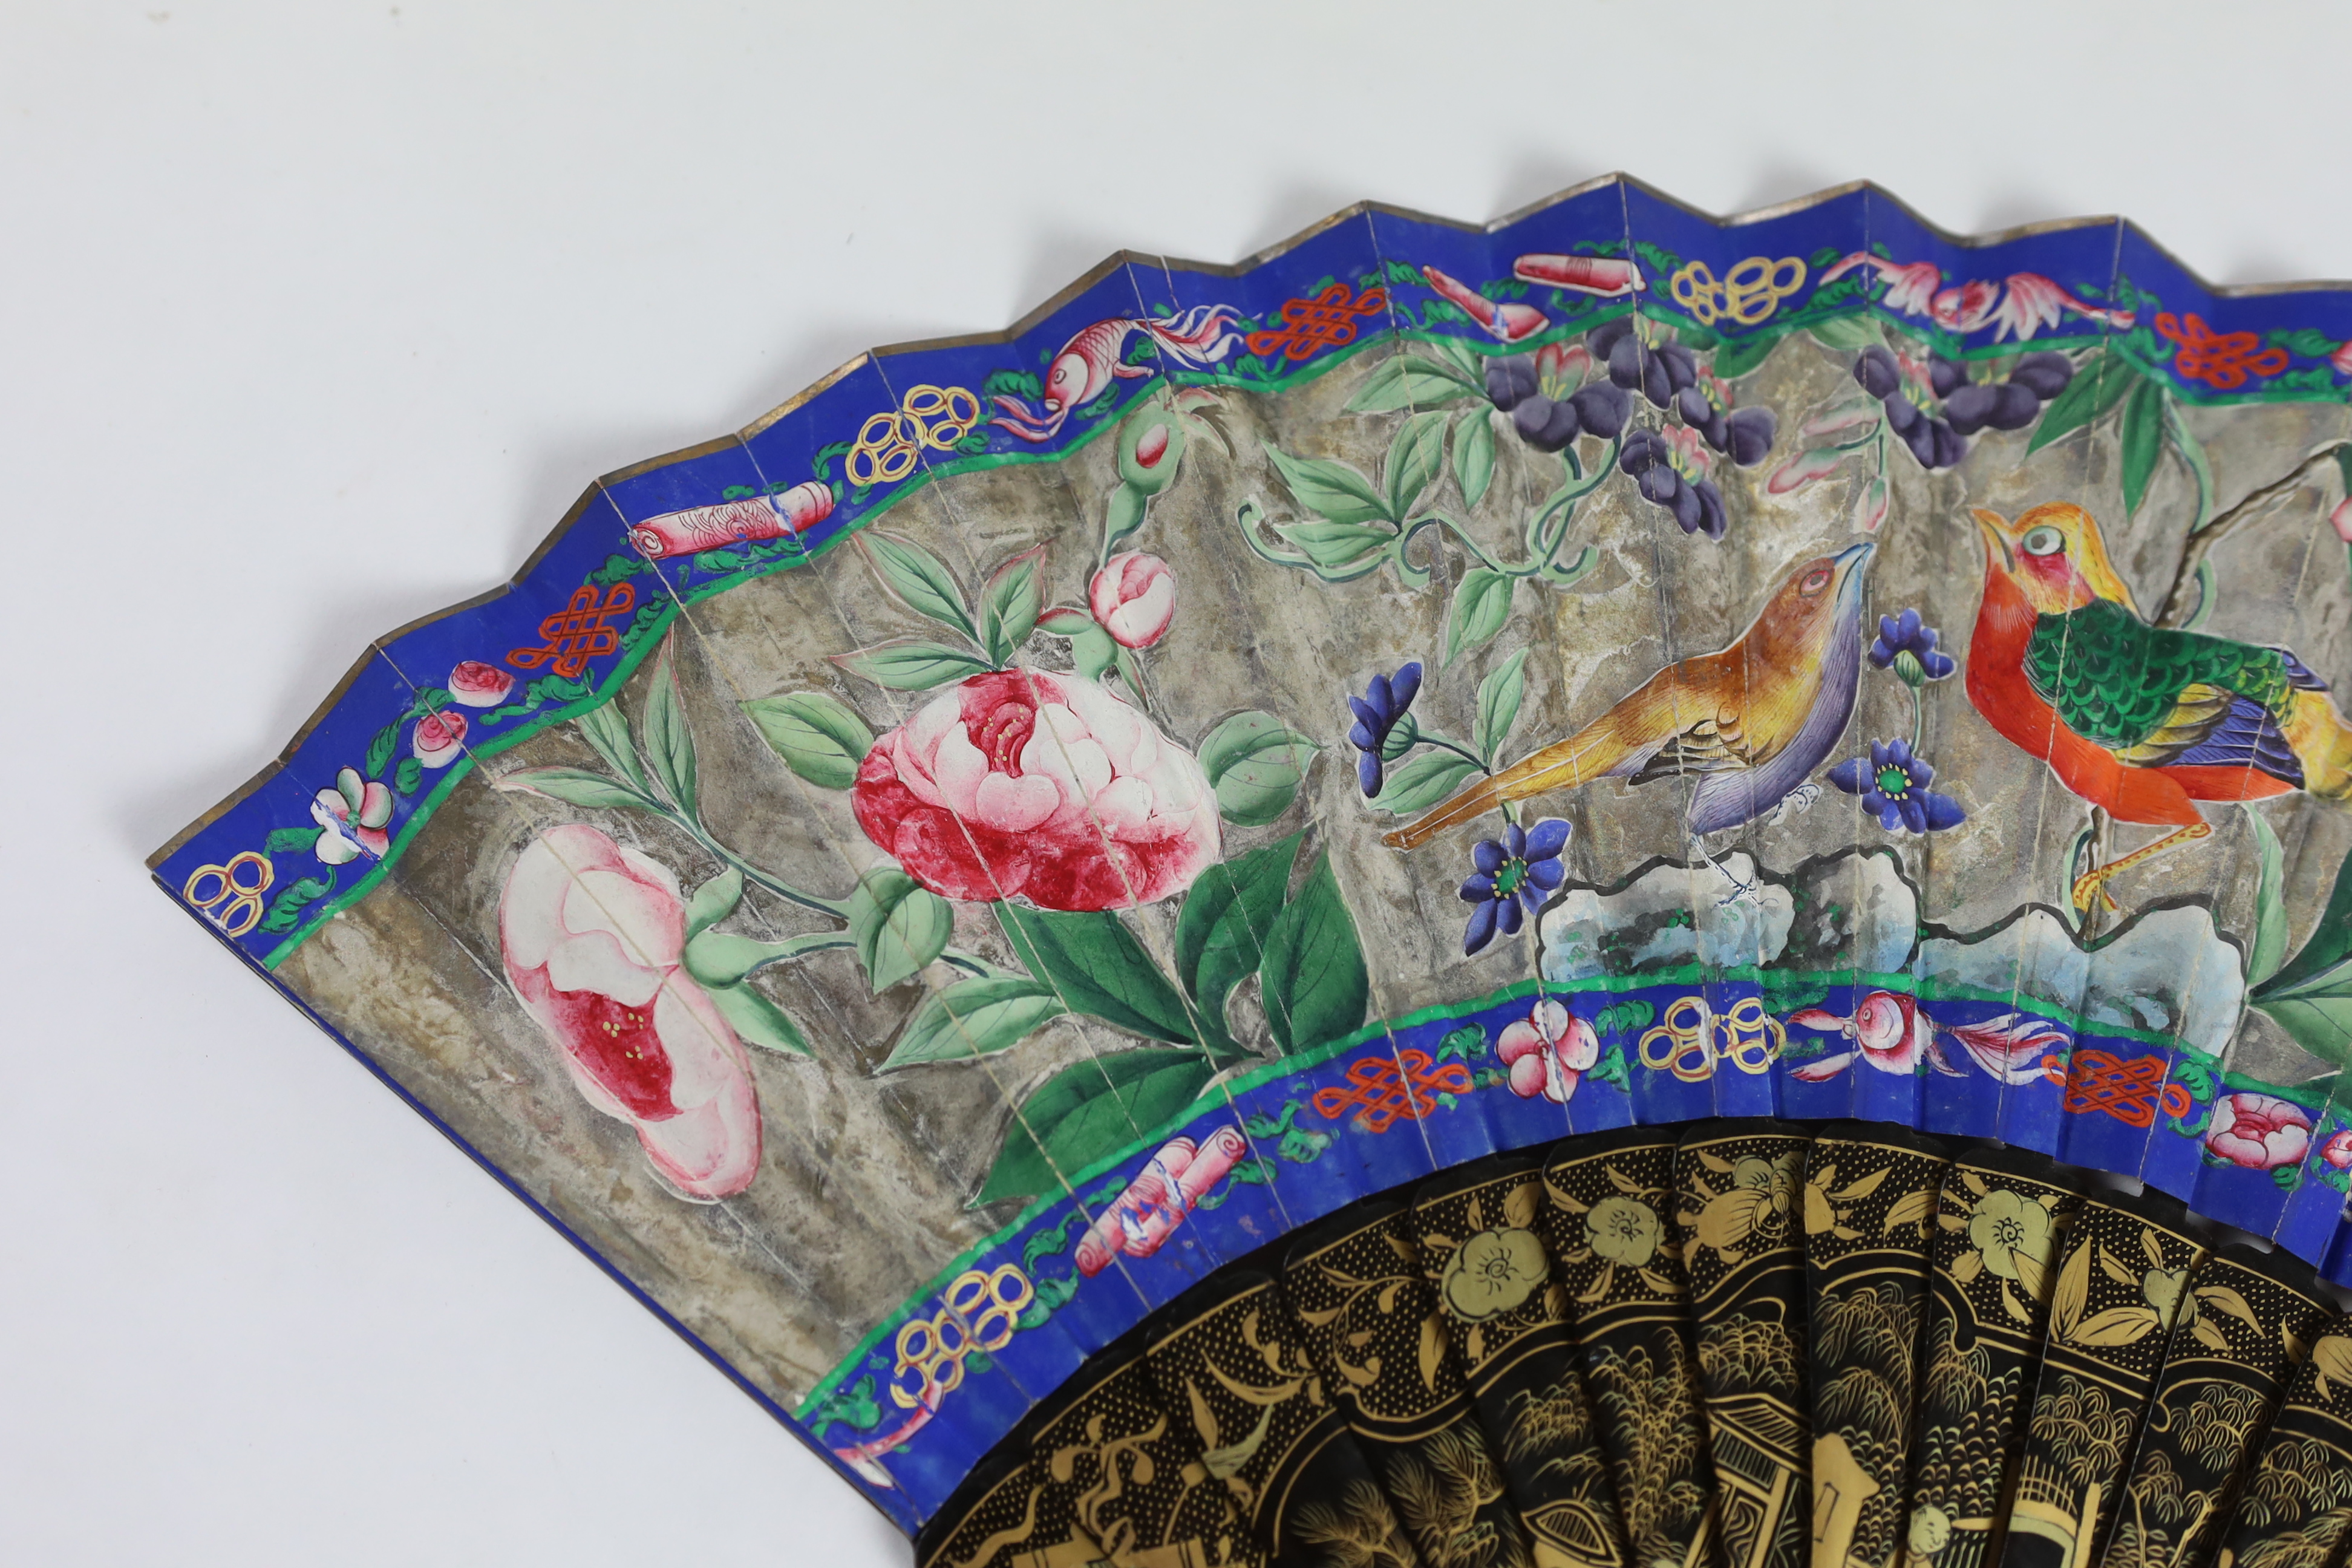 A 19th century Chinese ornately lacquered and hand painted figural leaf fan, the figures on the leaf having painted ivory faces, the back of the fan painted with exotic birds and flowers, CITES Submission reference TJUZX